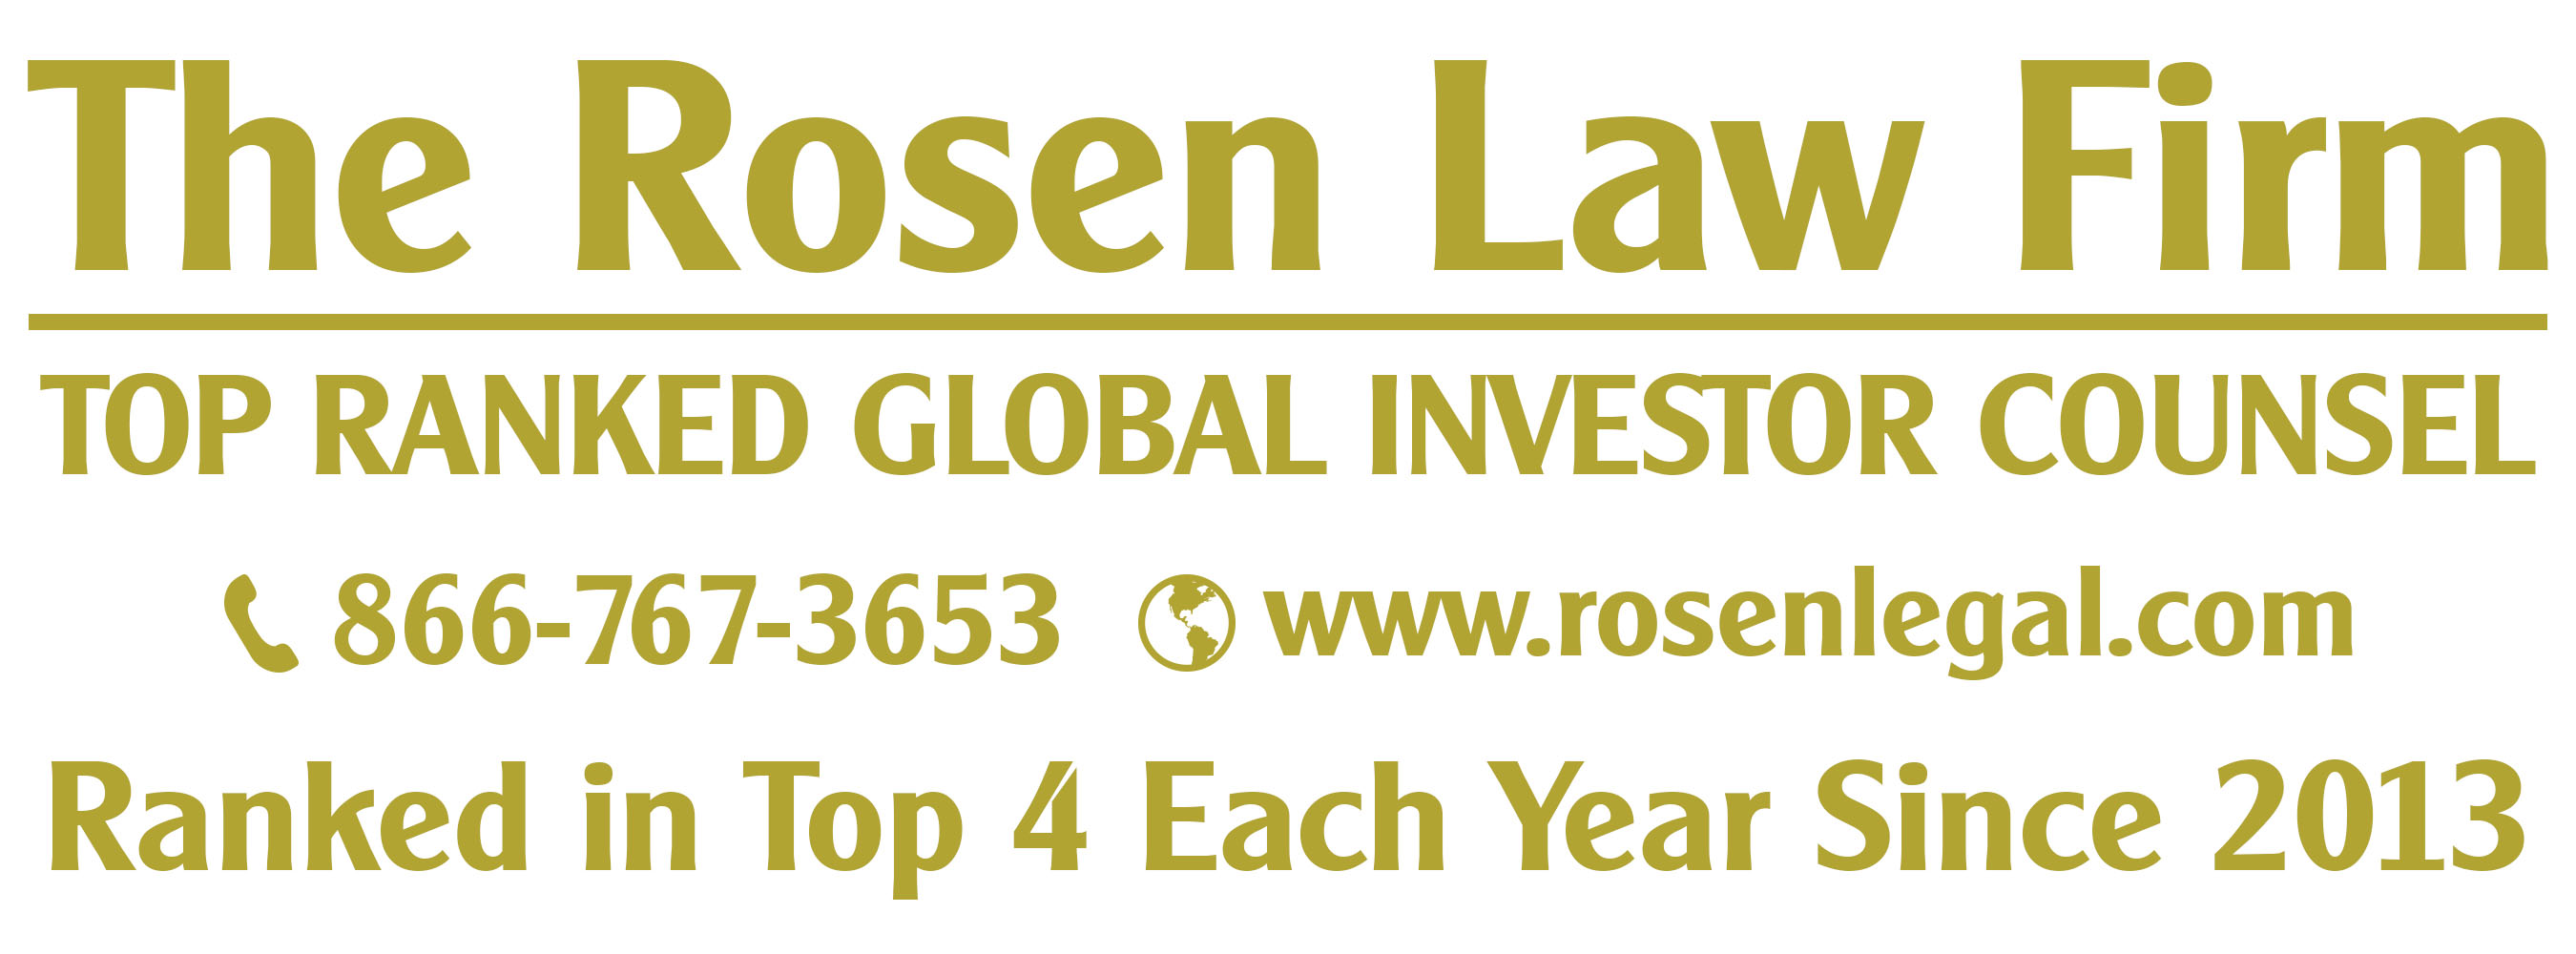 Rosen Law Firm PA, Thursday, August 11, 2022, Press release picture